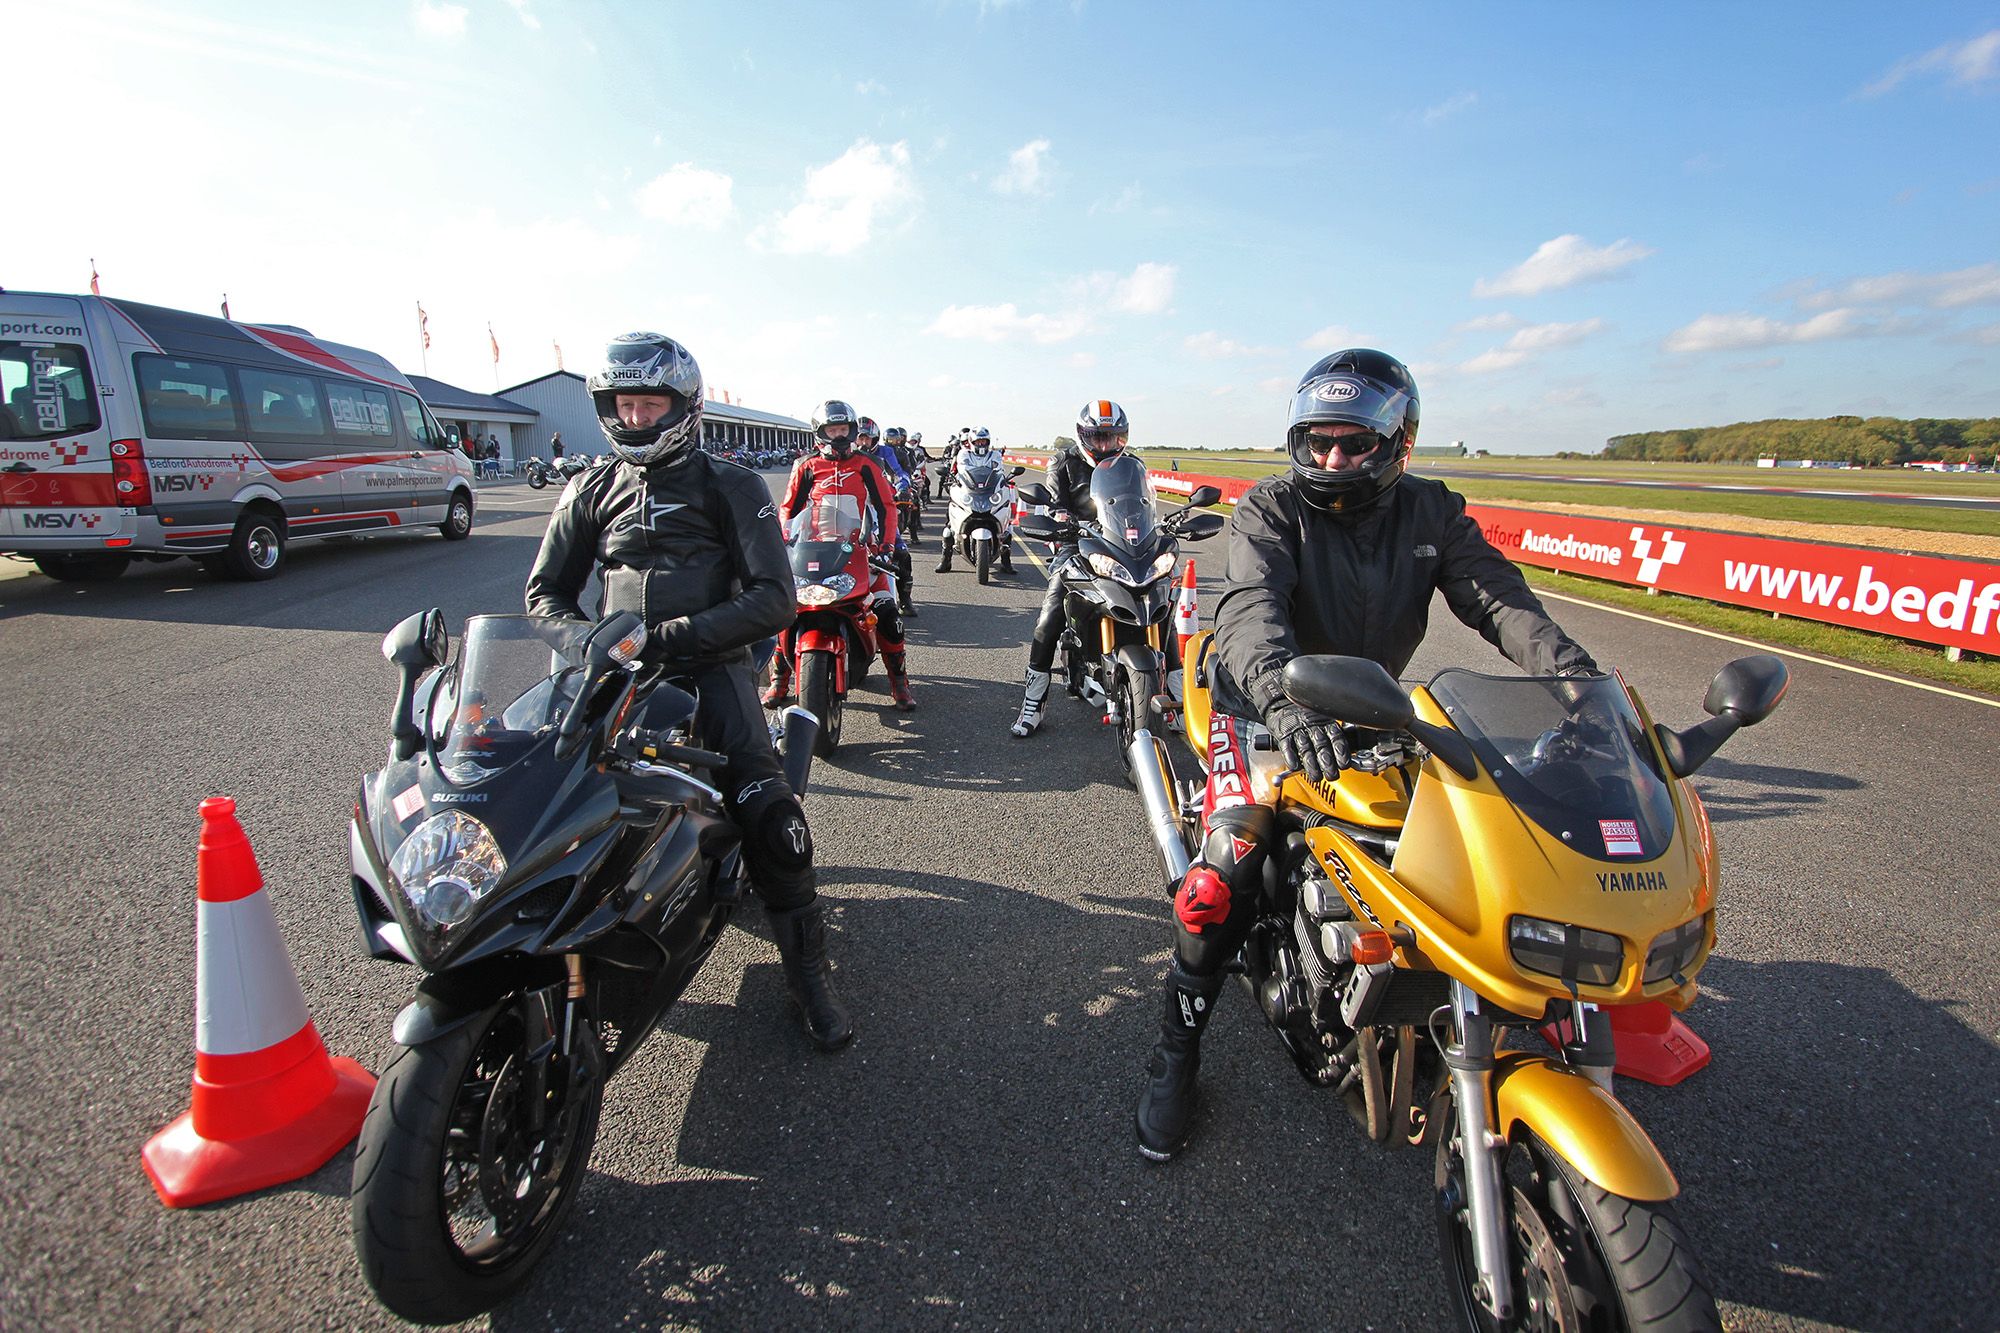 Motorcycles lining up at trackday front view